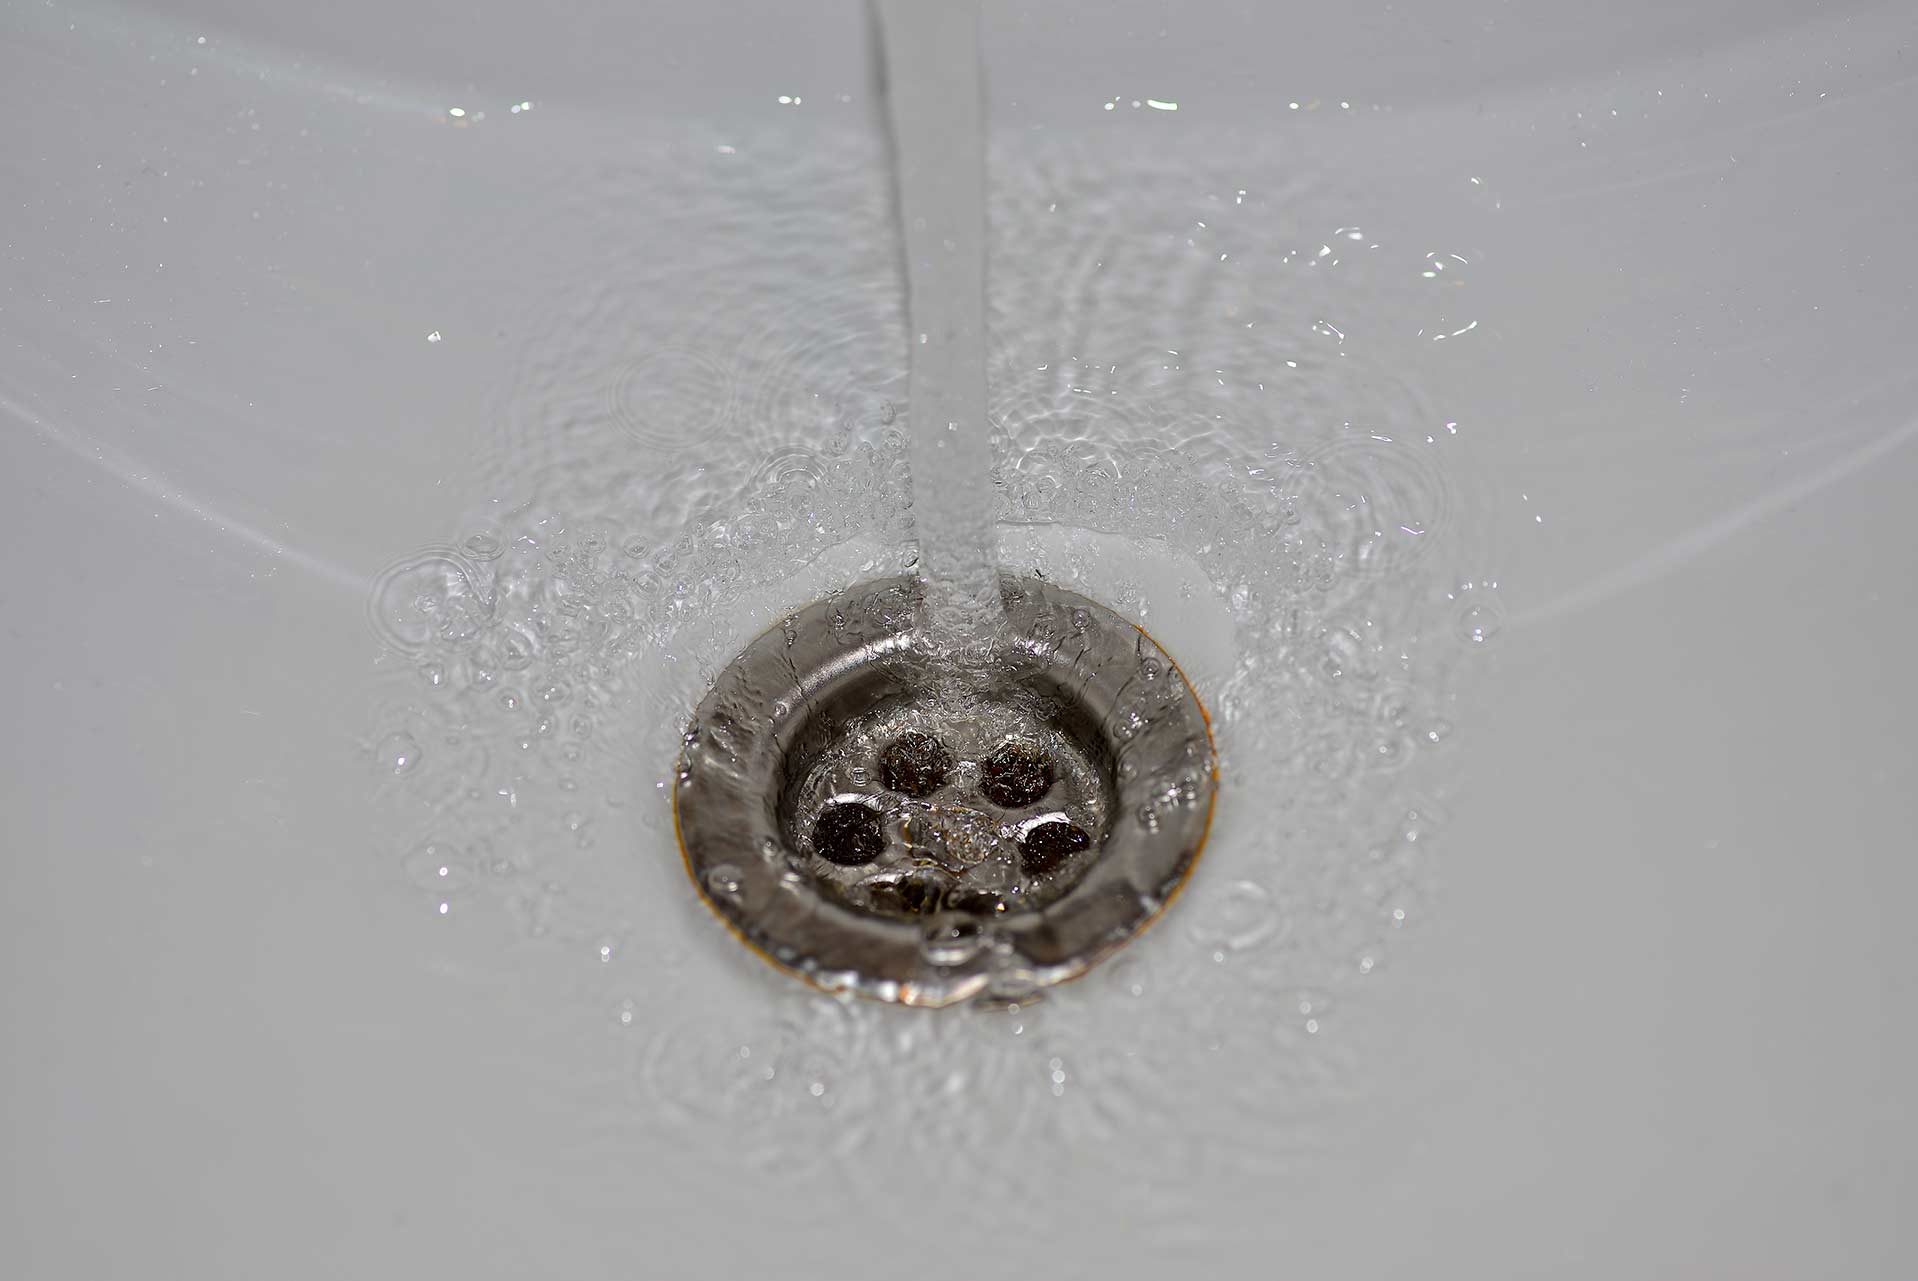 A2B Drains provides services to unblock blocked sinks and drains for properties in Leeds.